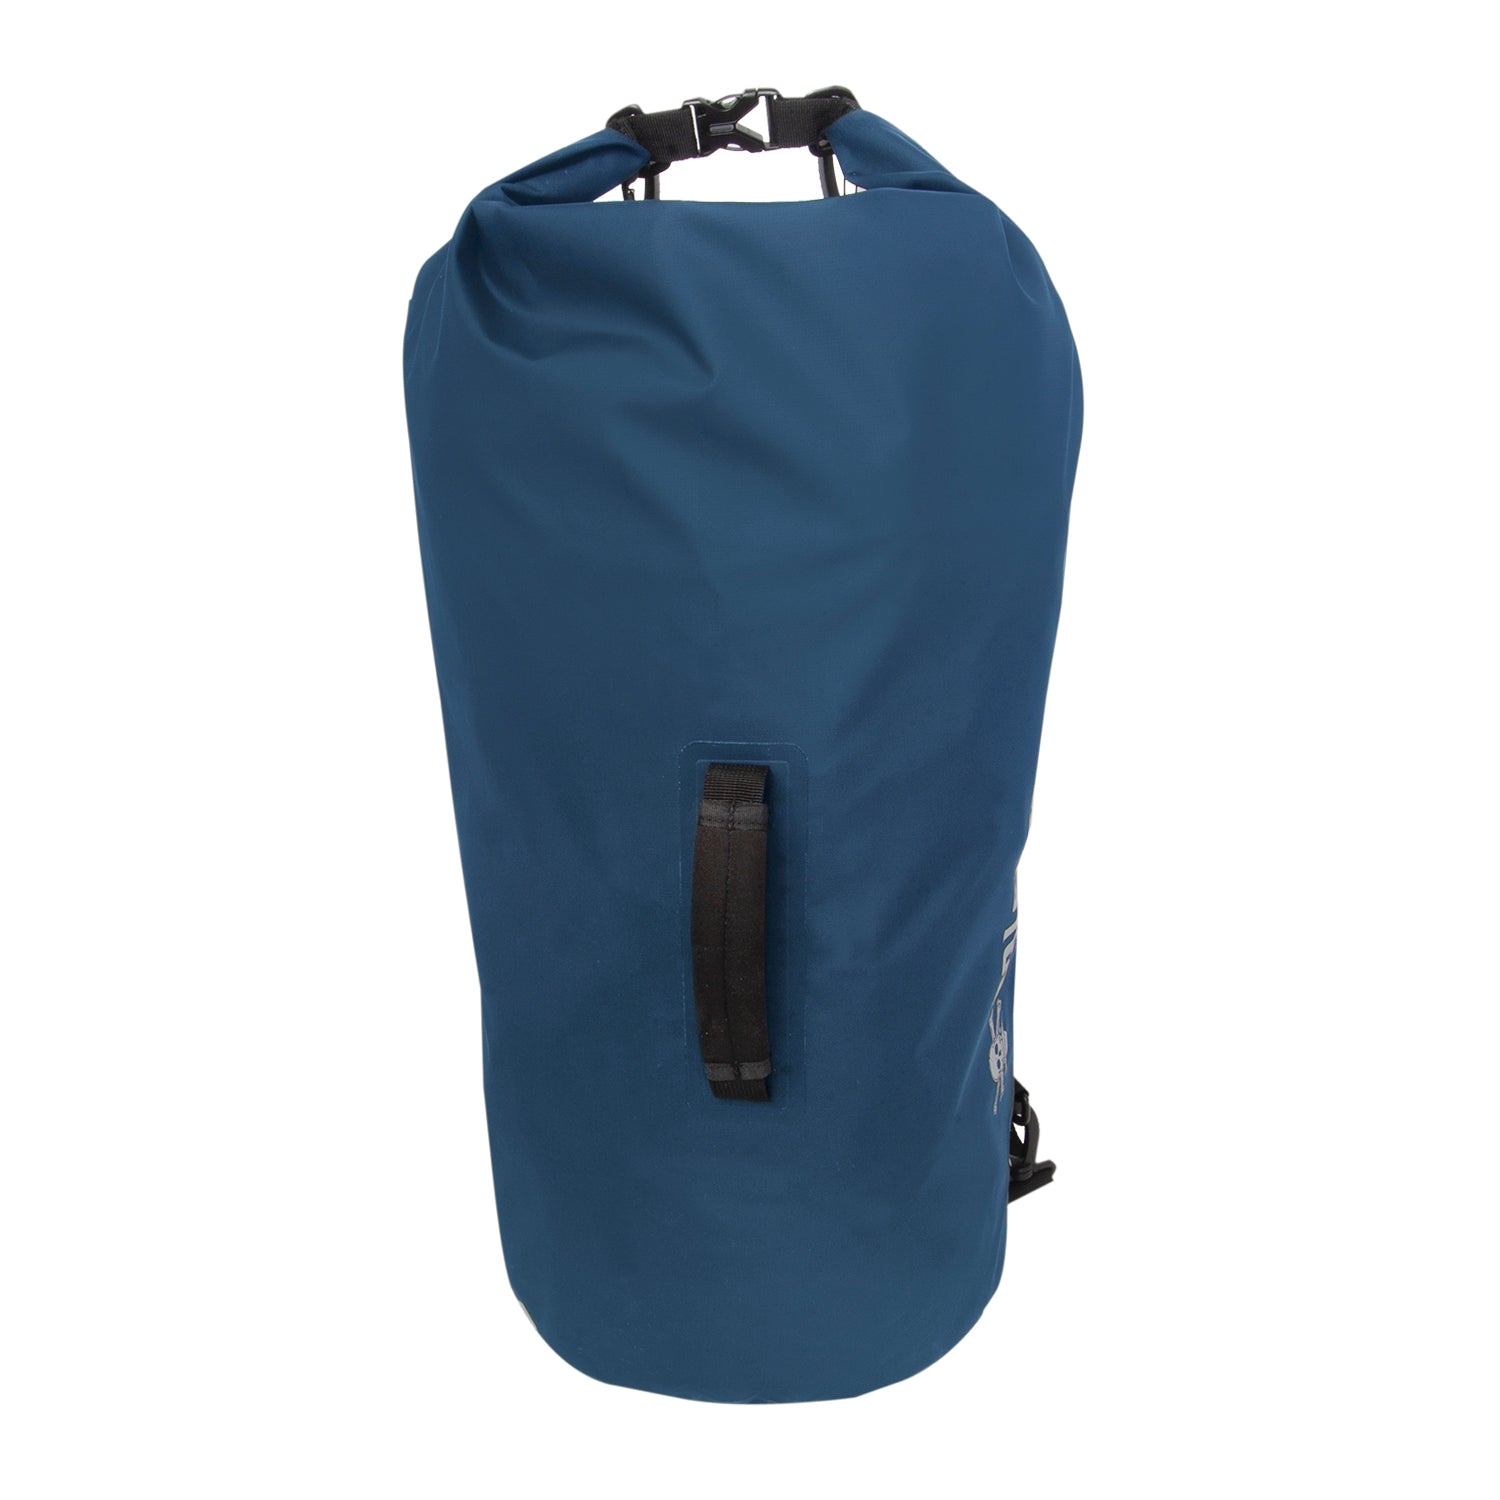 Calcutta dry bag 40L blue with carry handle